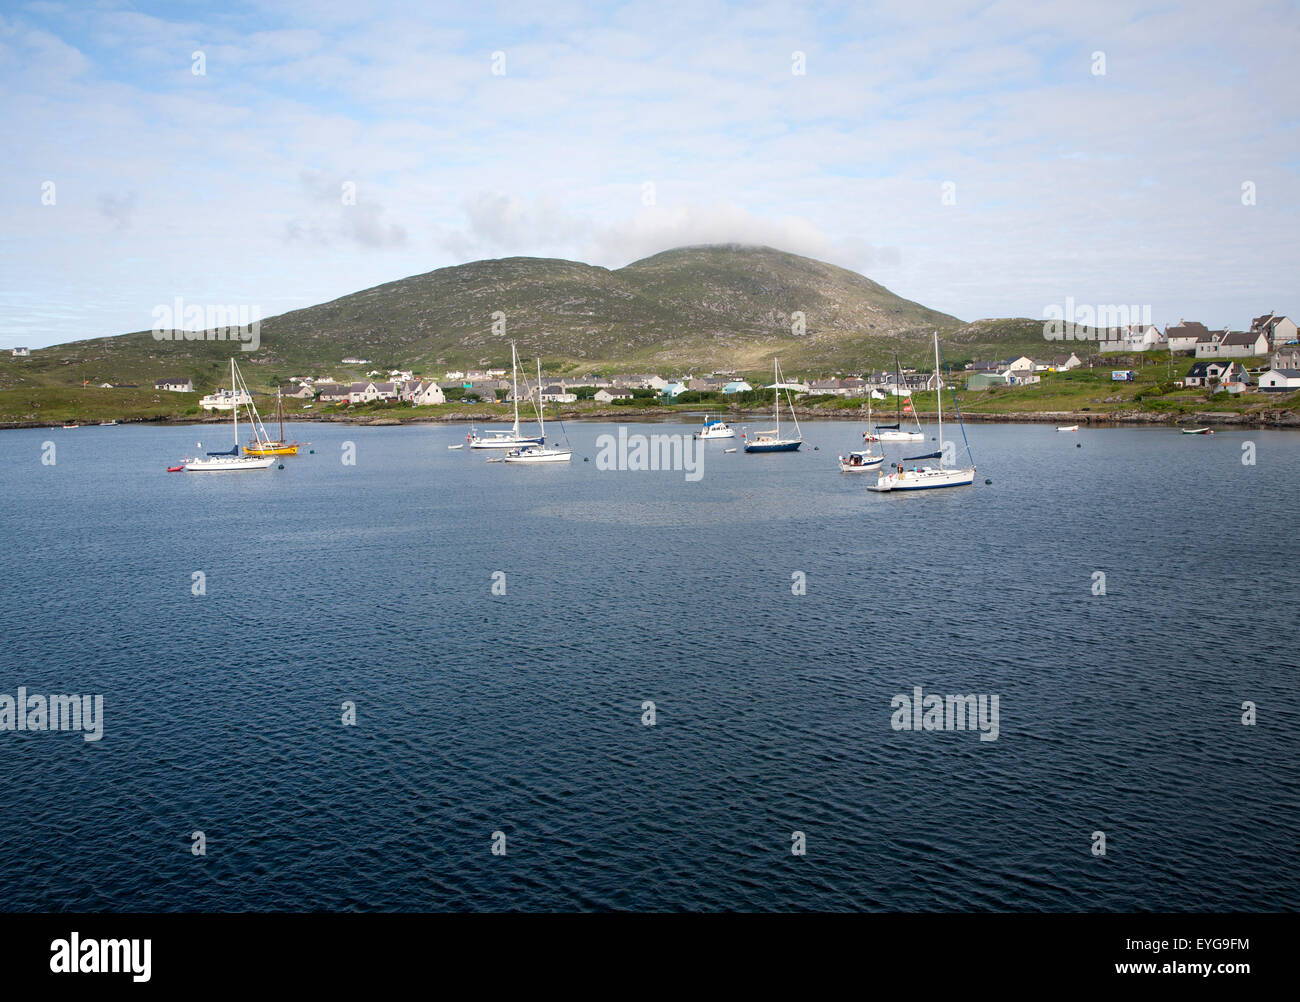 Yachts moored in the harbour at Castlebay, Barra, Outer Hebrides, Scotland, UK Stock Photo